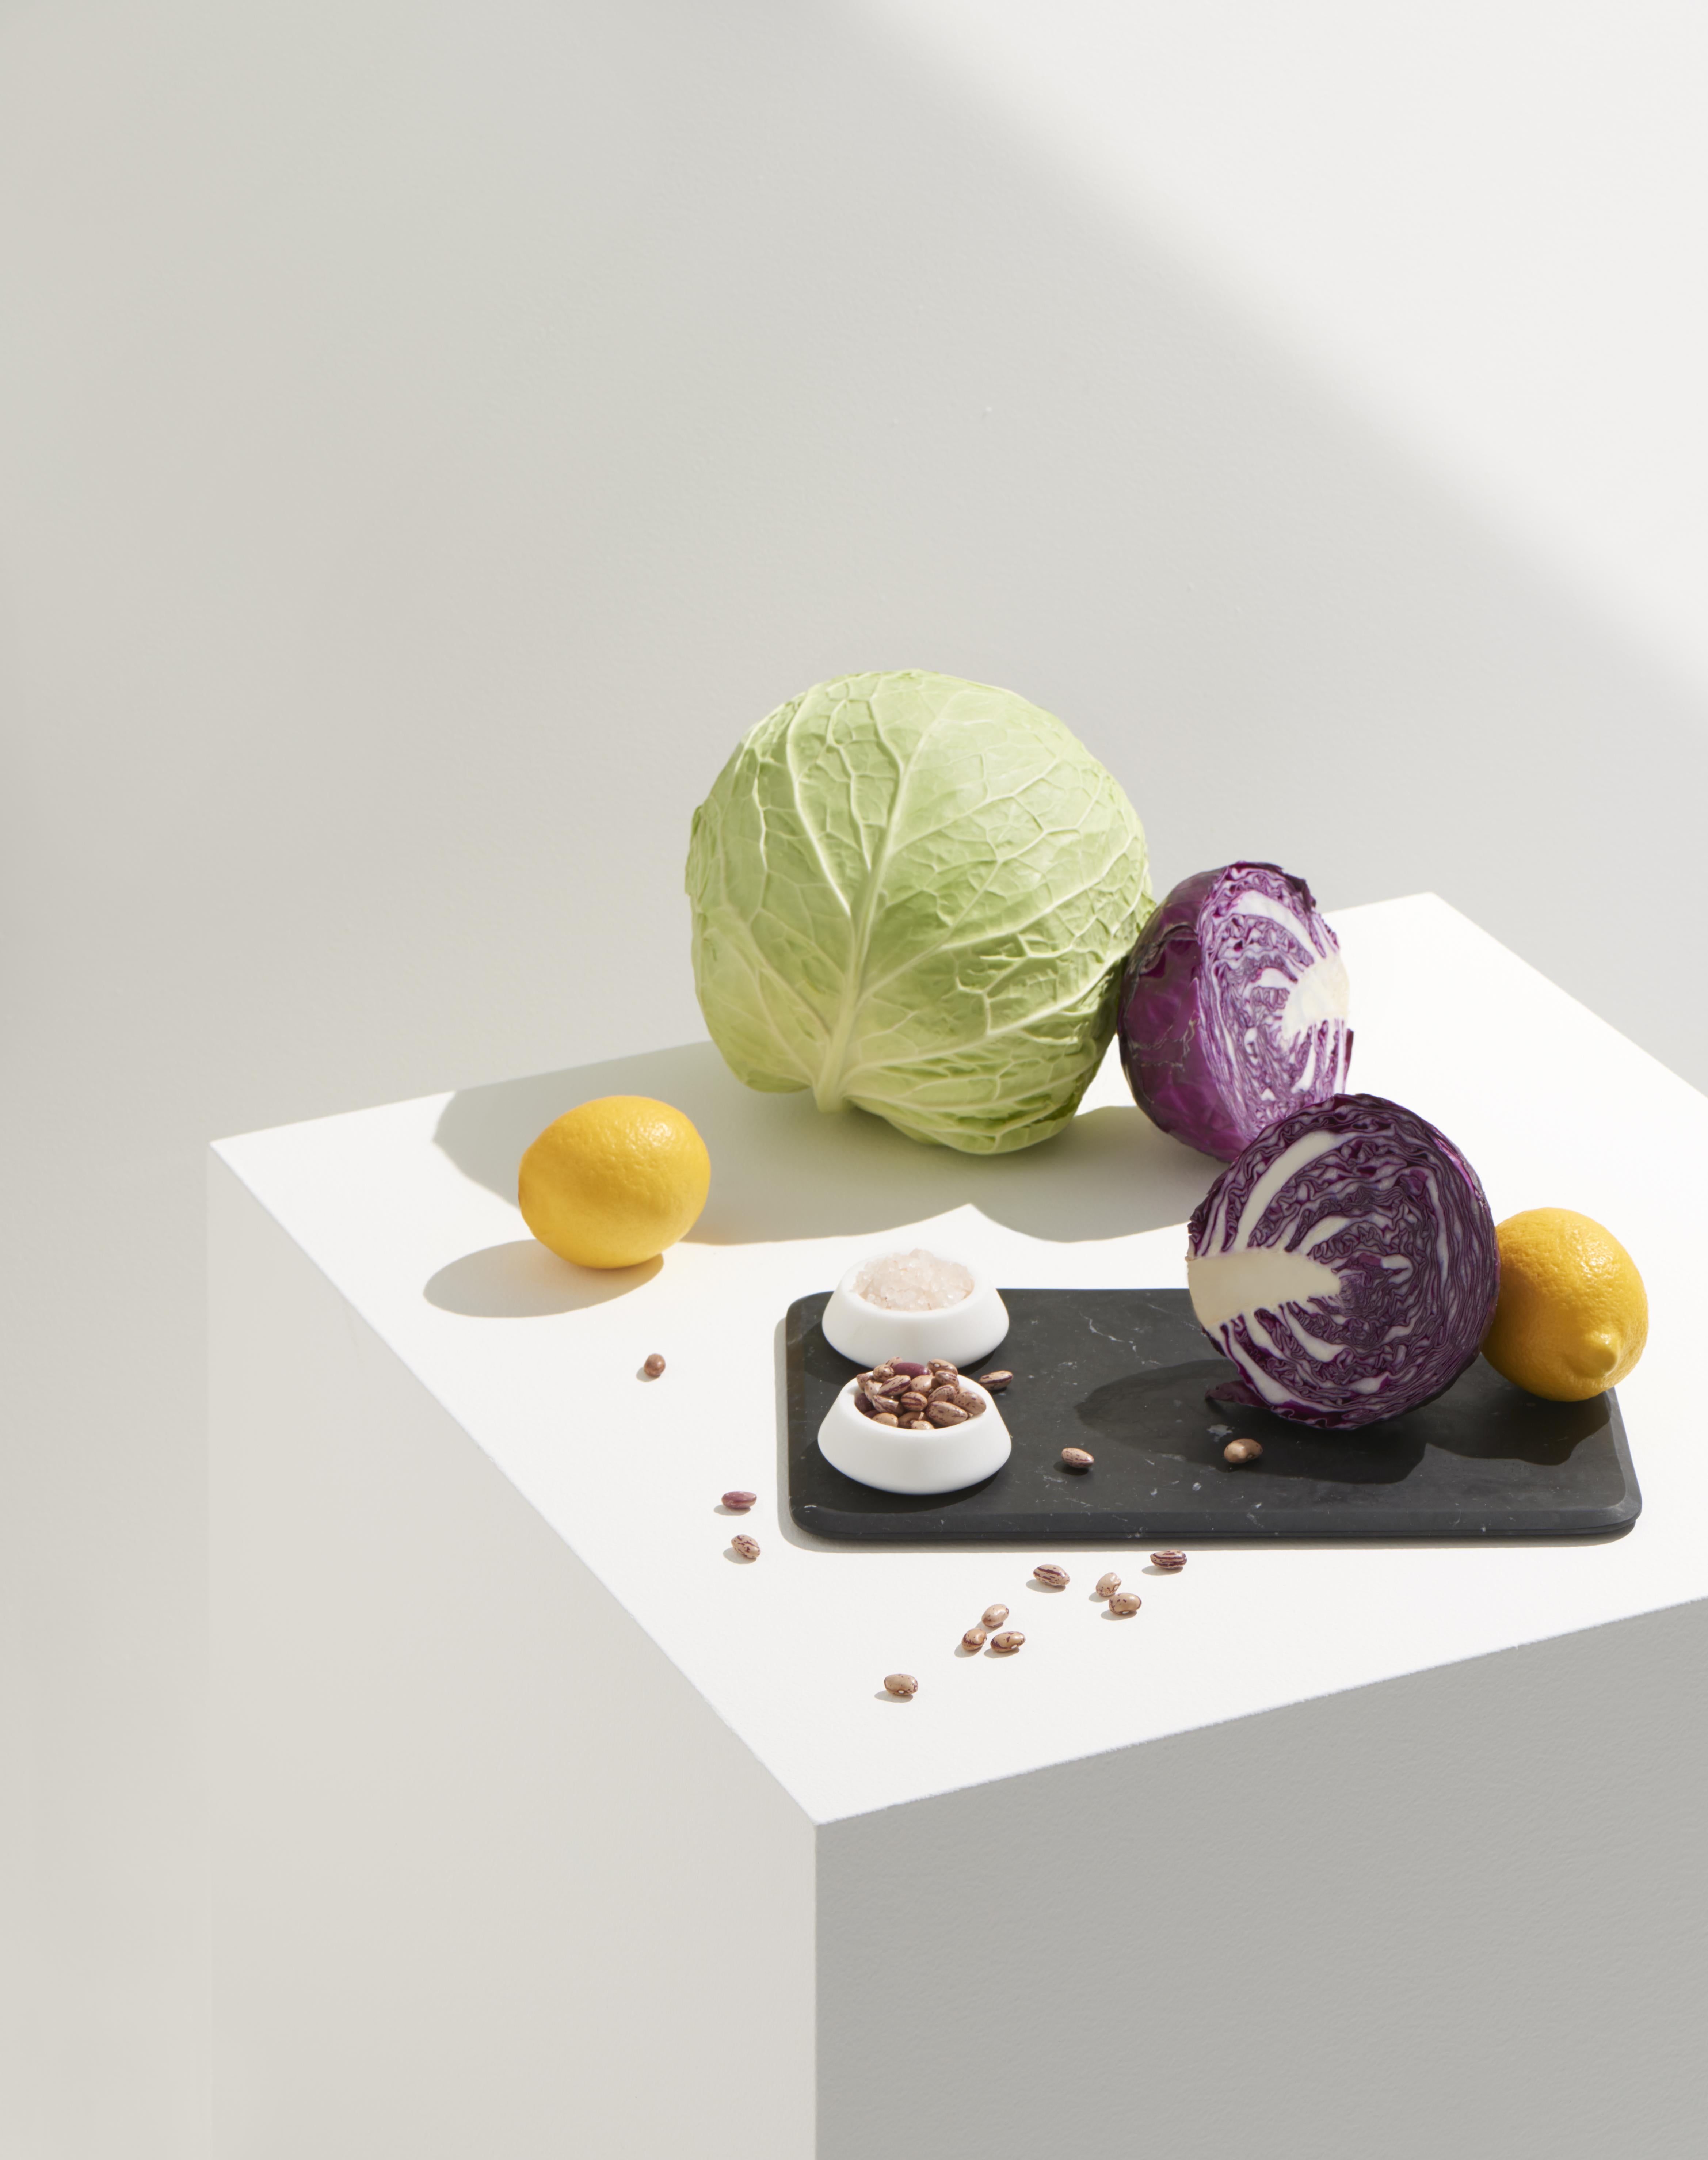 Let us cut off the ordinary: a board is not necessarily just a serving platter. It is an individual way of serving cheeses, meats, vegetables or bread. Marble lends itself to the game by providing the special staging. The item includes two white